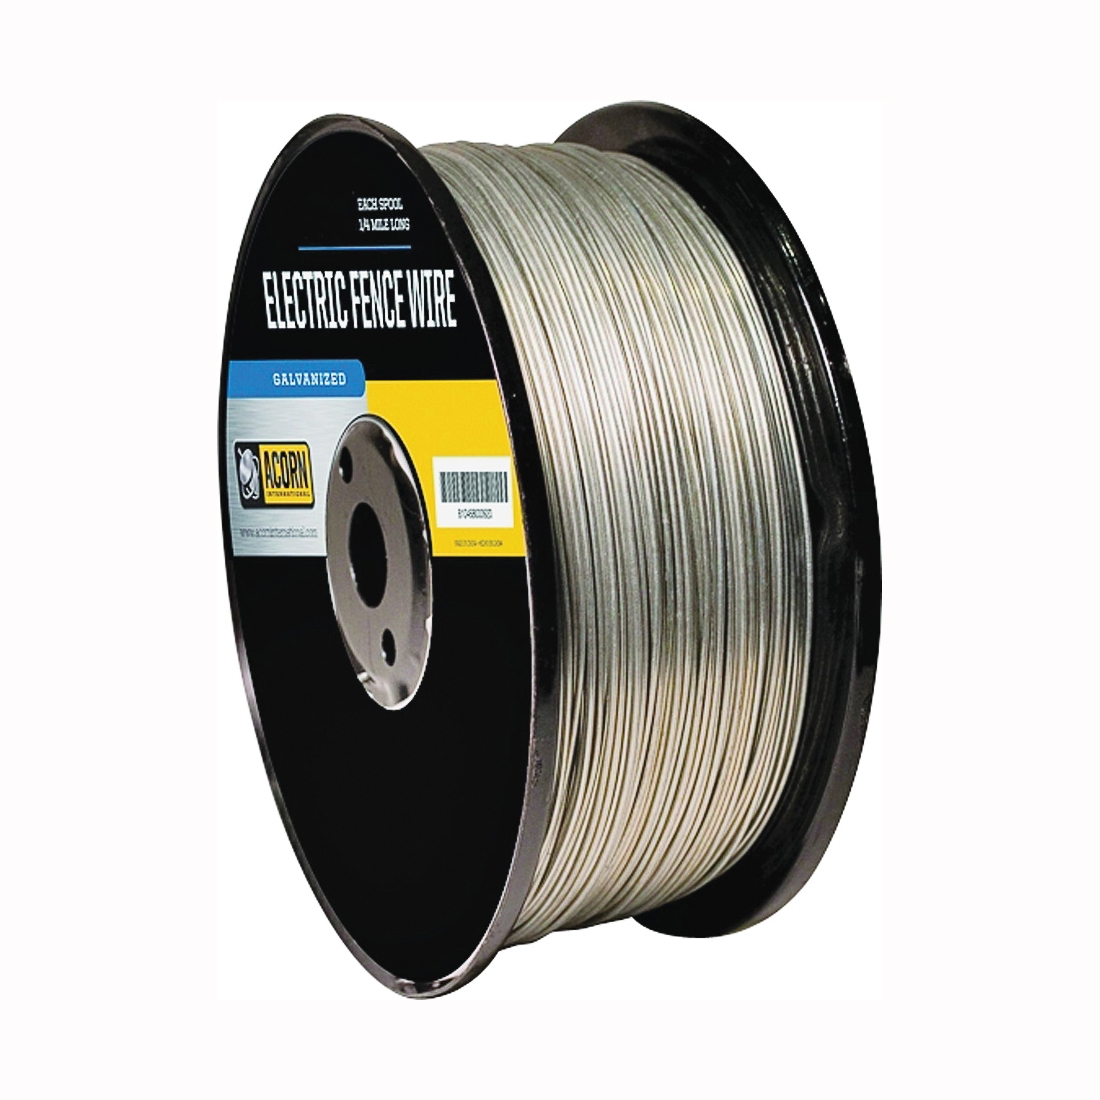 EFW1714 Electric Fence Wire, 17 ga Wire, Metal Conductor, 1/4 mile L